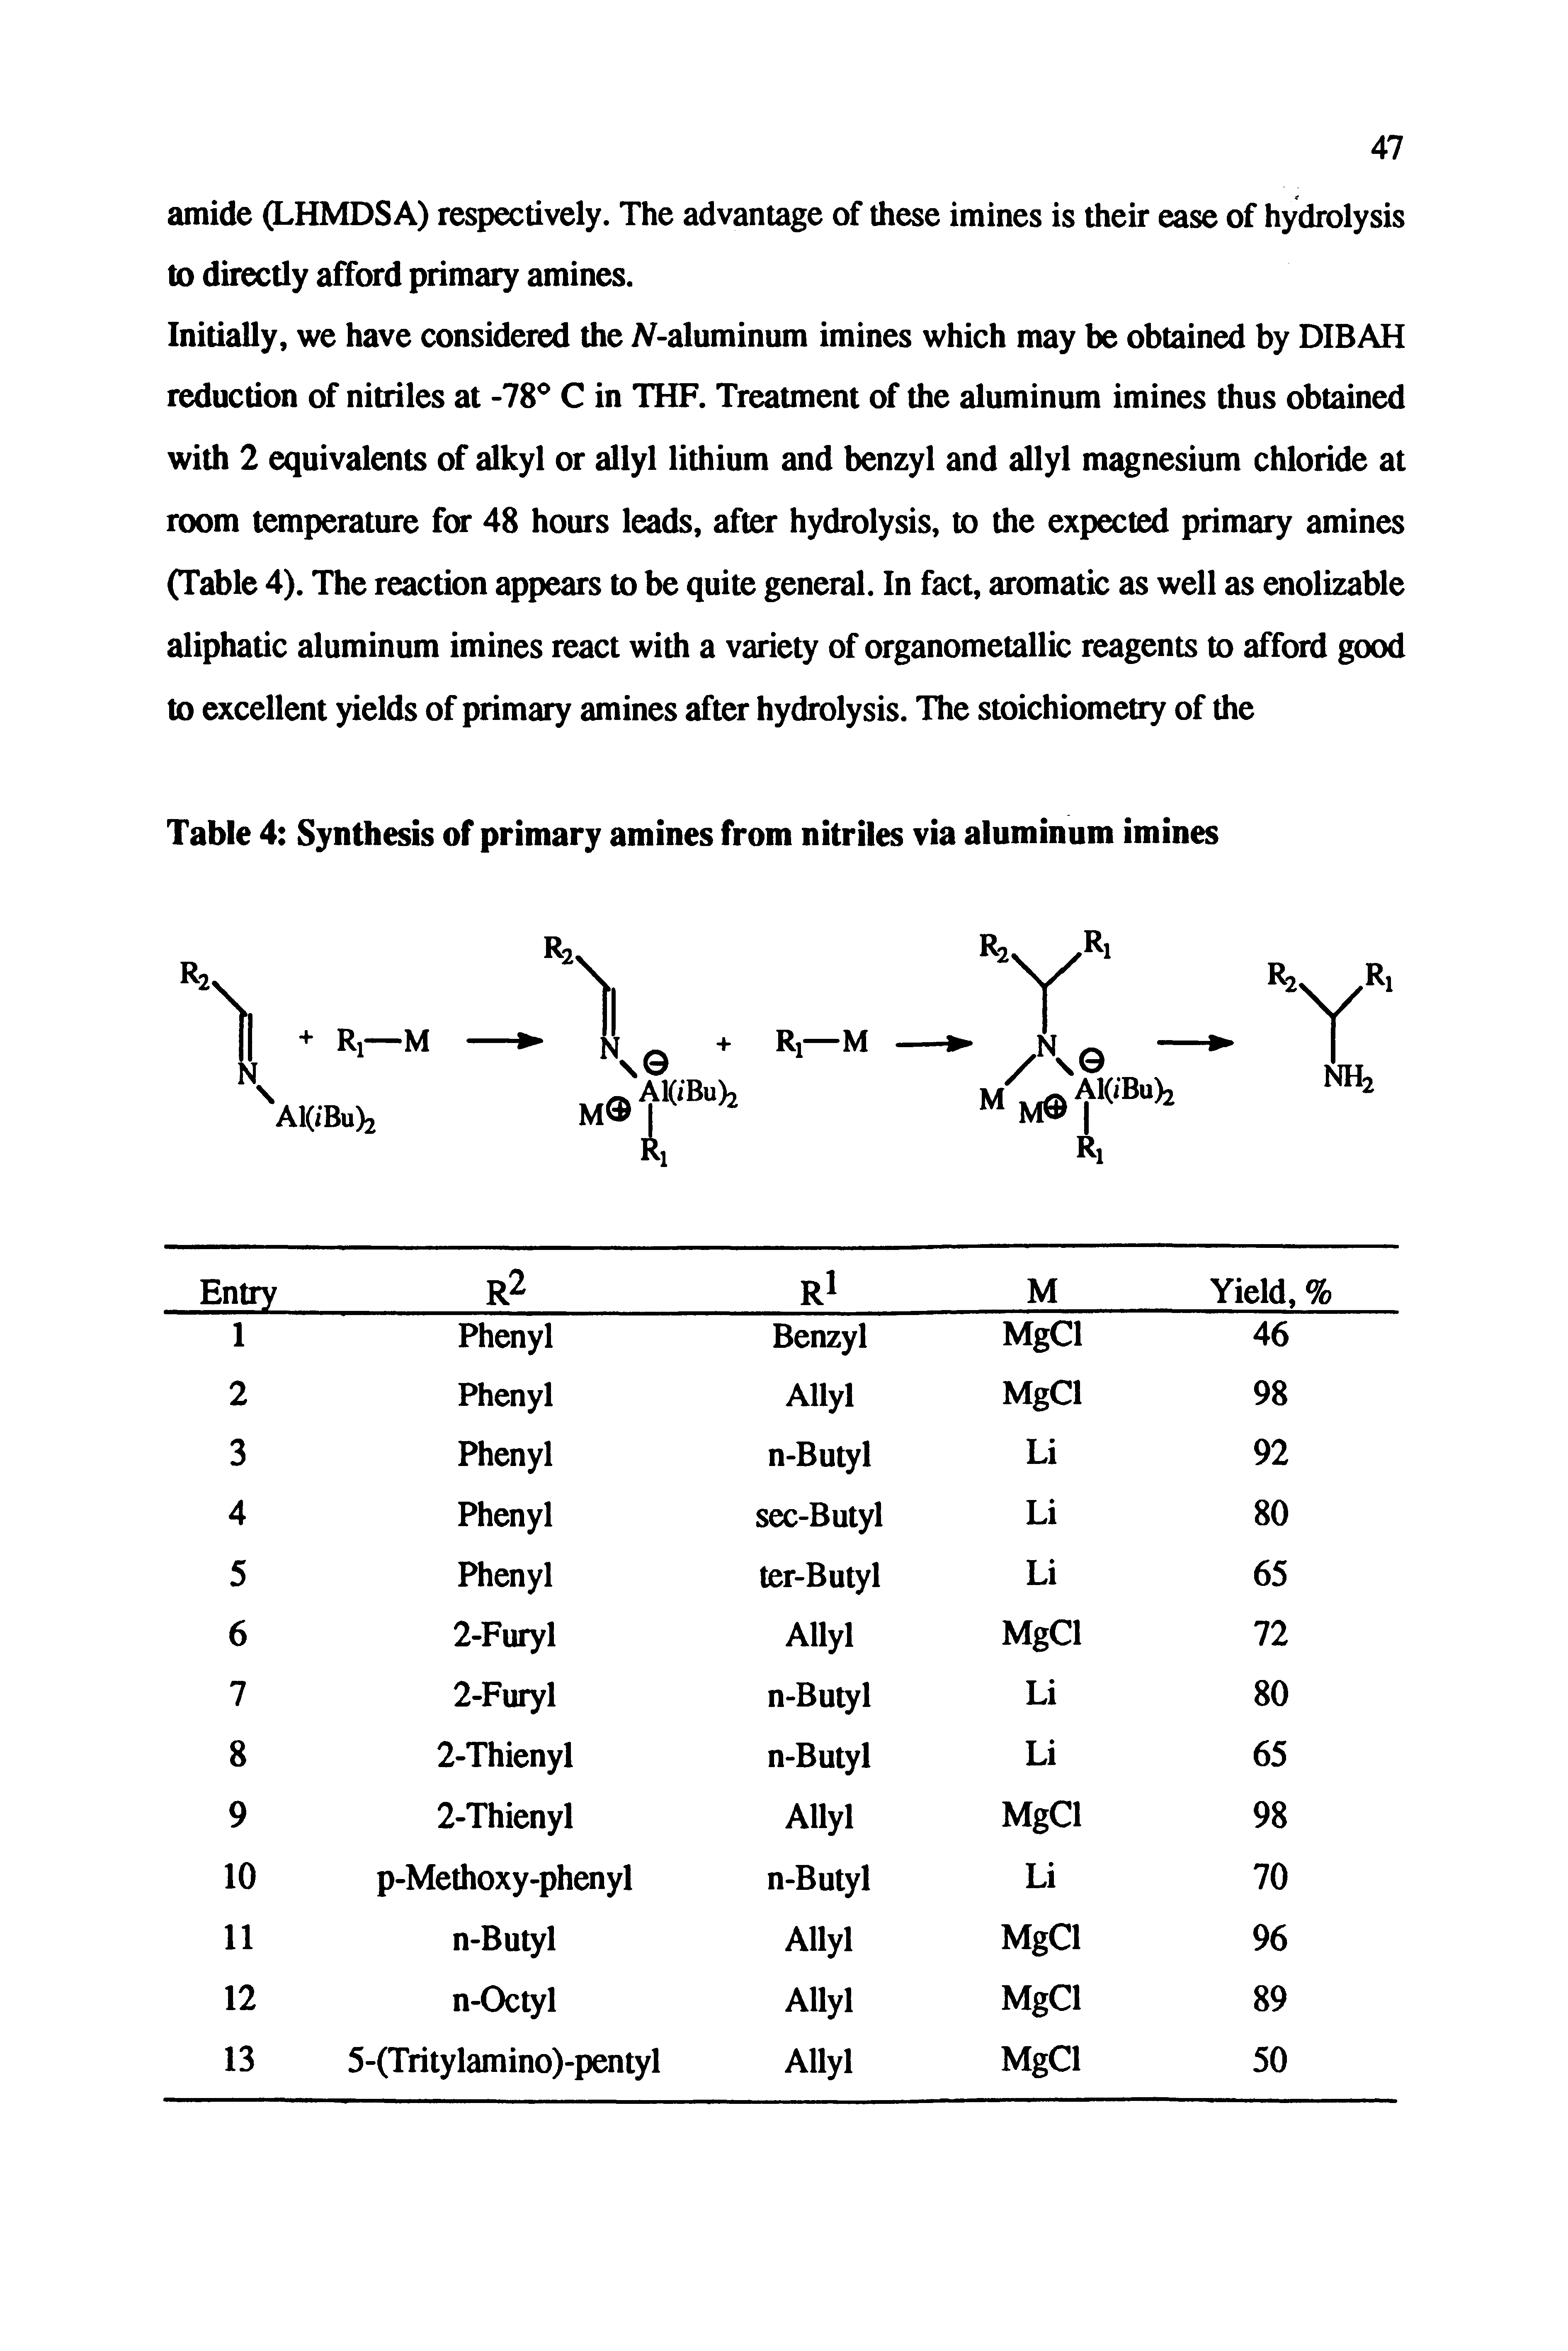 Table 4 Synthesis of primary amines from nitriles via aluminum imines...